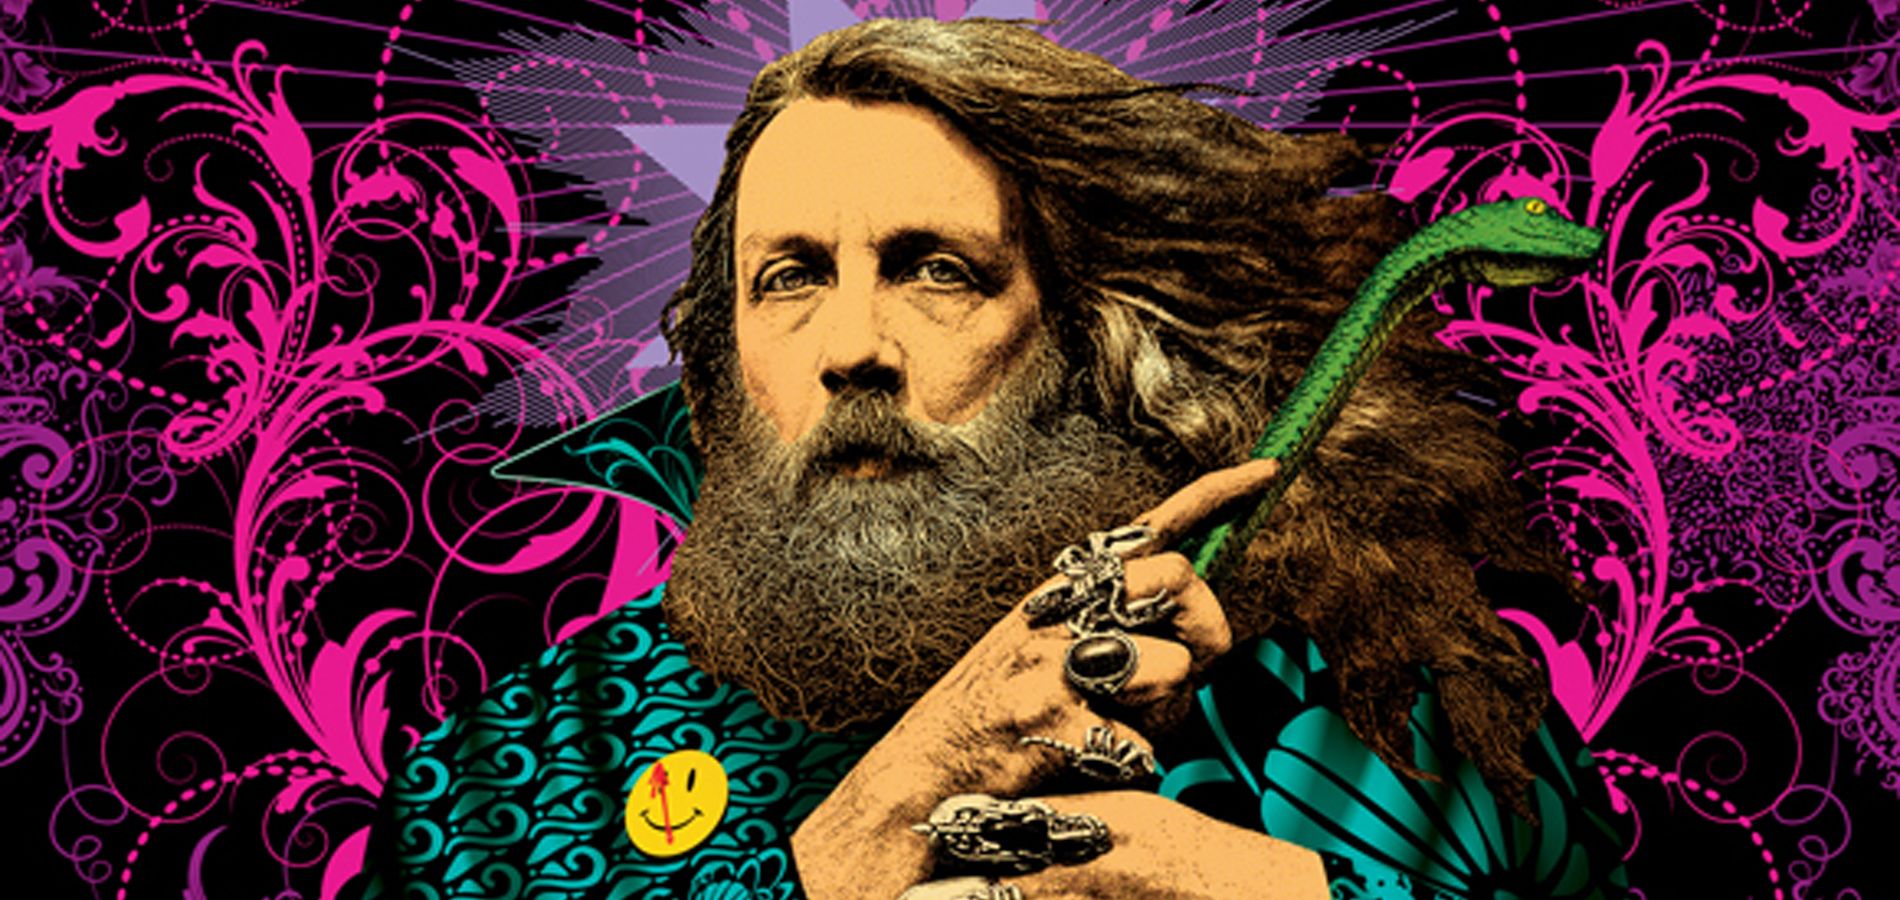 11013040 1093206984040348 1694037756841349238 n - Radio Clash Podcast The Mindscape of Alan Moore Radio Clash Music Mashup Podcast brings you the best in eclectic tunes, mashups and remixes from around the world. Since 2004, we've been bringing you the freshest and most innovative music from a diverse range of genres and cultures. Join us on our musical journey as we explore the sounds of yesterday, today, and tomorrow. Discover new music and be inspired by the mashup of musical styles that only Radio Clash can provide. Subscribe now to elevate your musical experience!